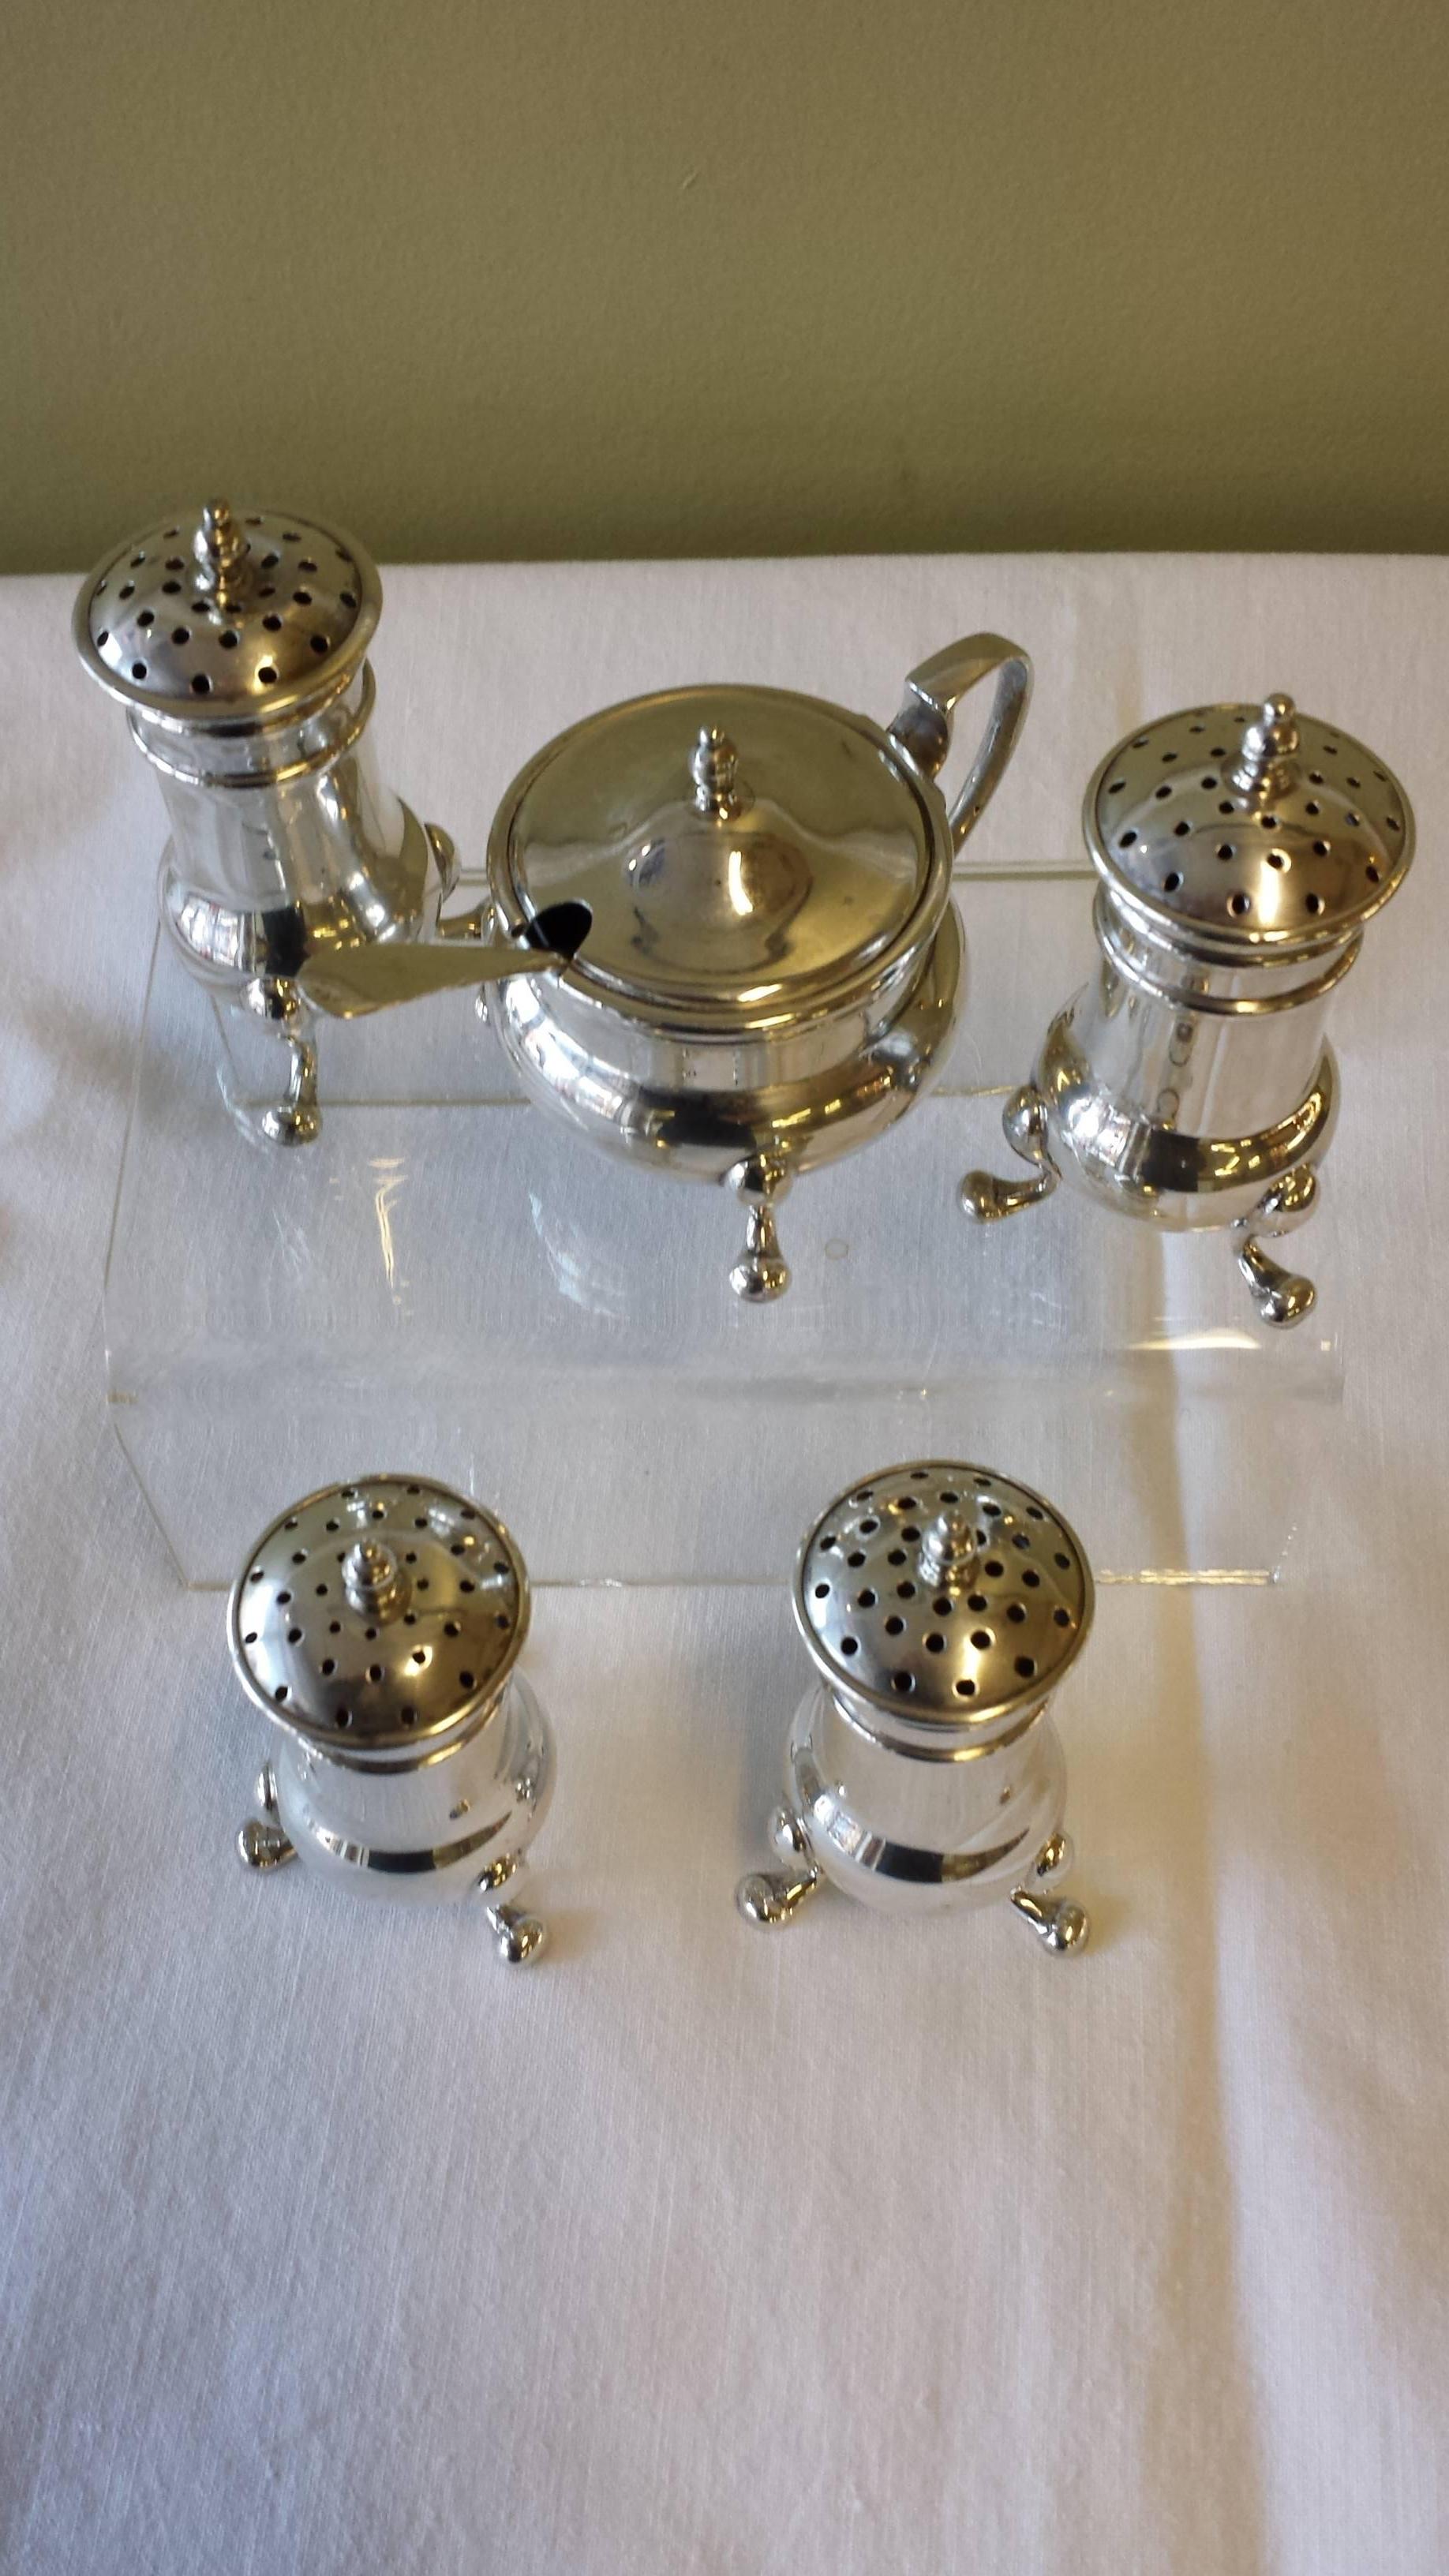 5 Pcs. Sterling Silver Condiment Set & Spoon Retailed By Birks Canada, 4- Salt & Pepper Shakers, Mustard/Condiment  Pot with a blue glass liner and sterling silver spoon. Each piece is on a Queen Anne style leg. The shakers are 2 1/2"-